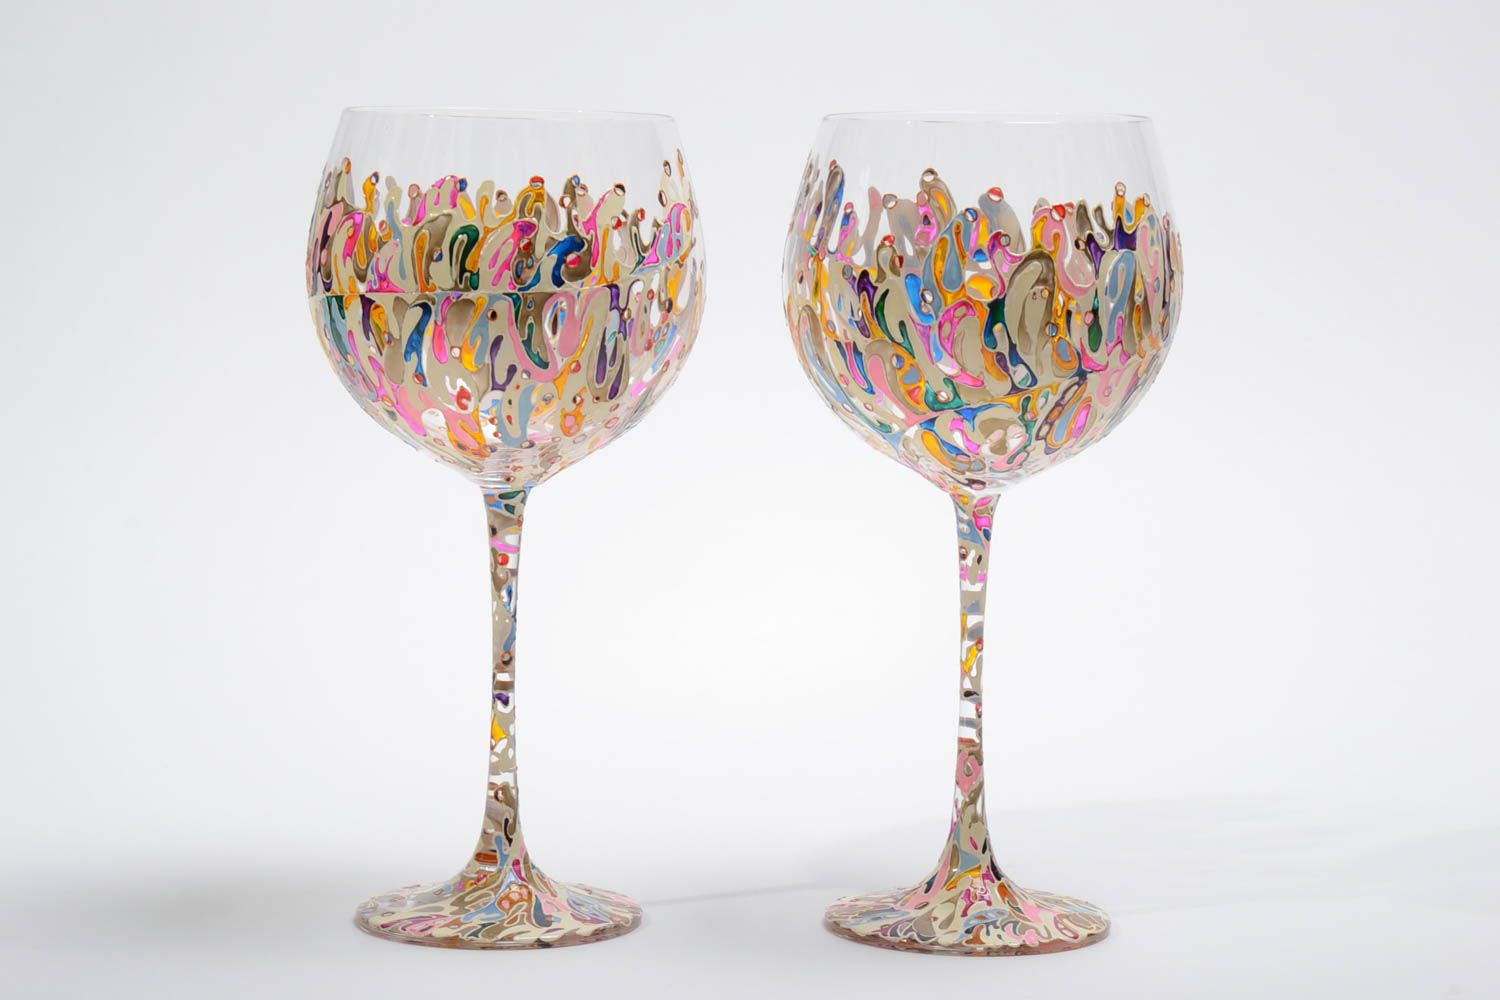 Painted Wine Glasses, Cute Wine Glasses, Newlywed Gift, Gift for